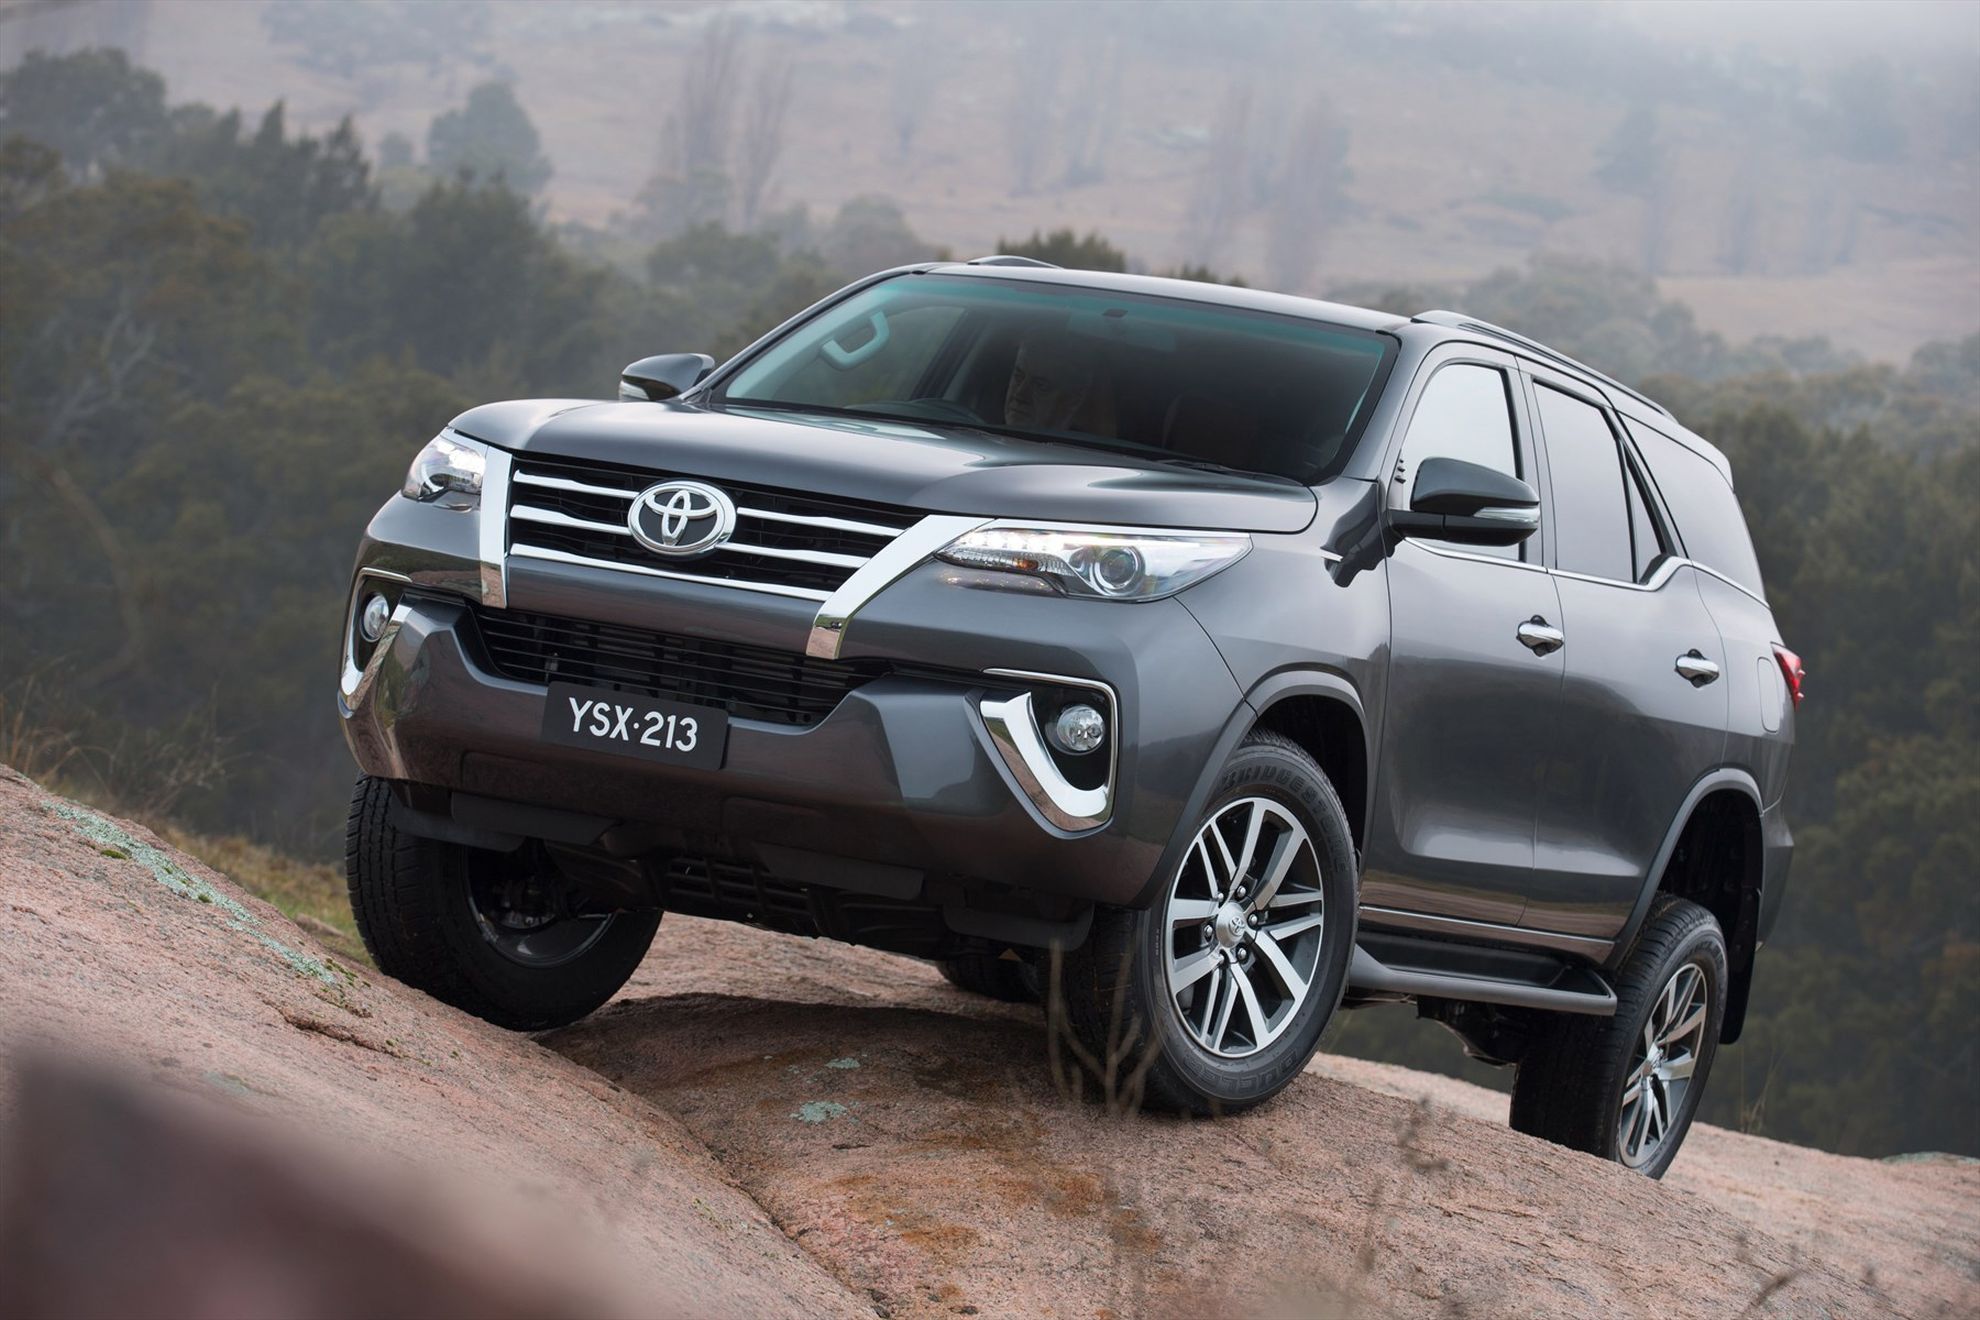 The all-new, bolder Toyota Fortuner bows in